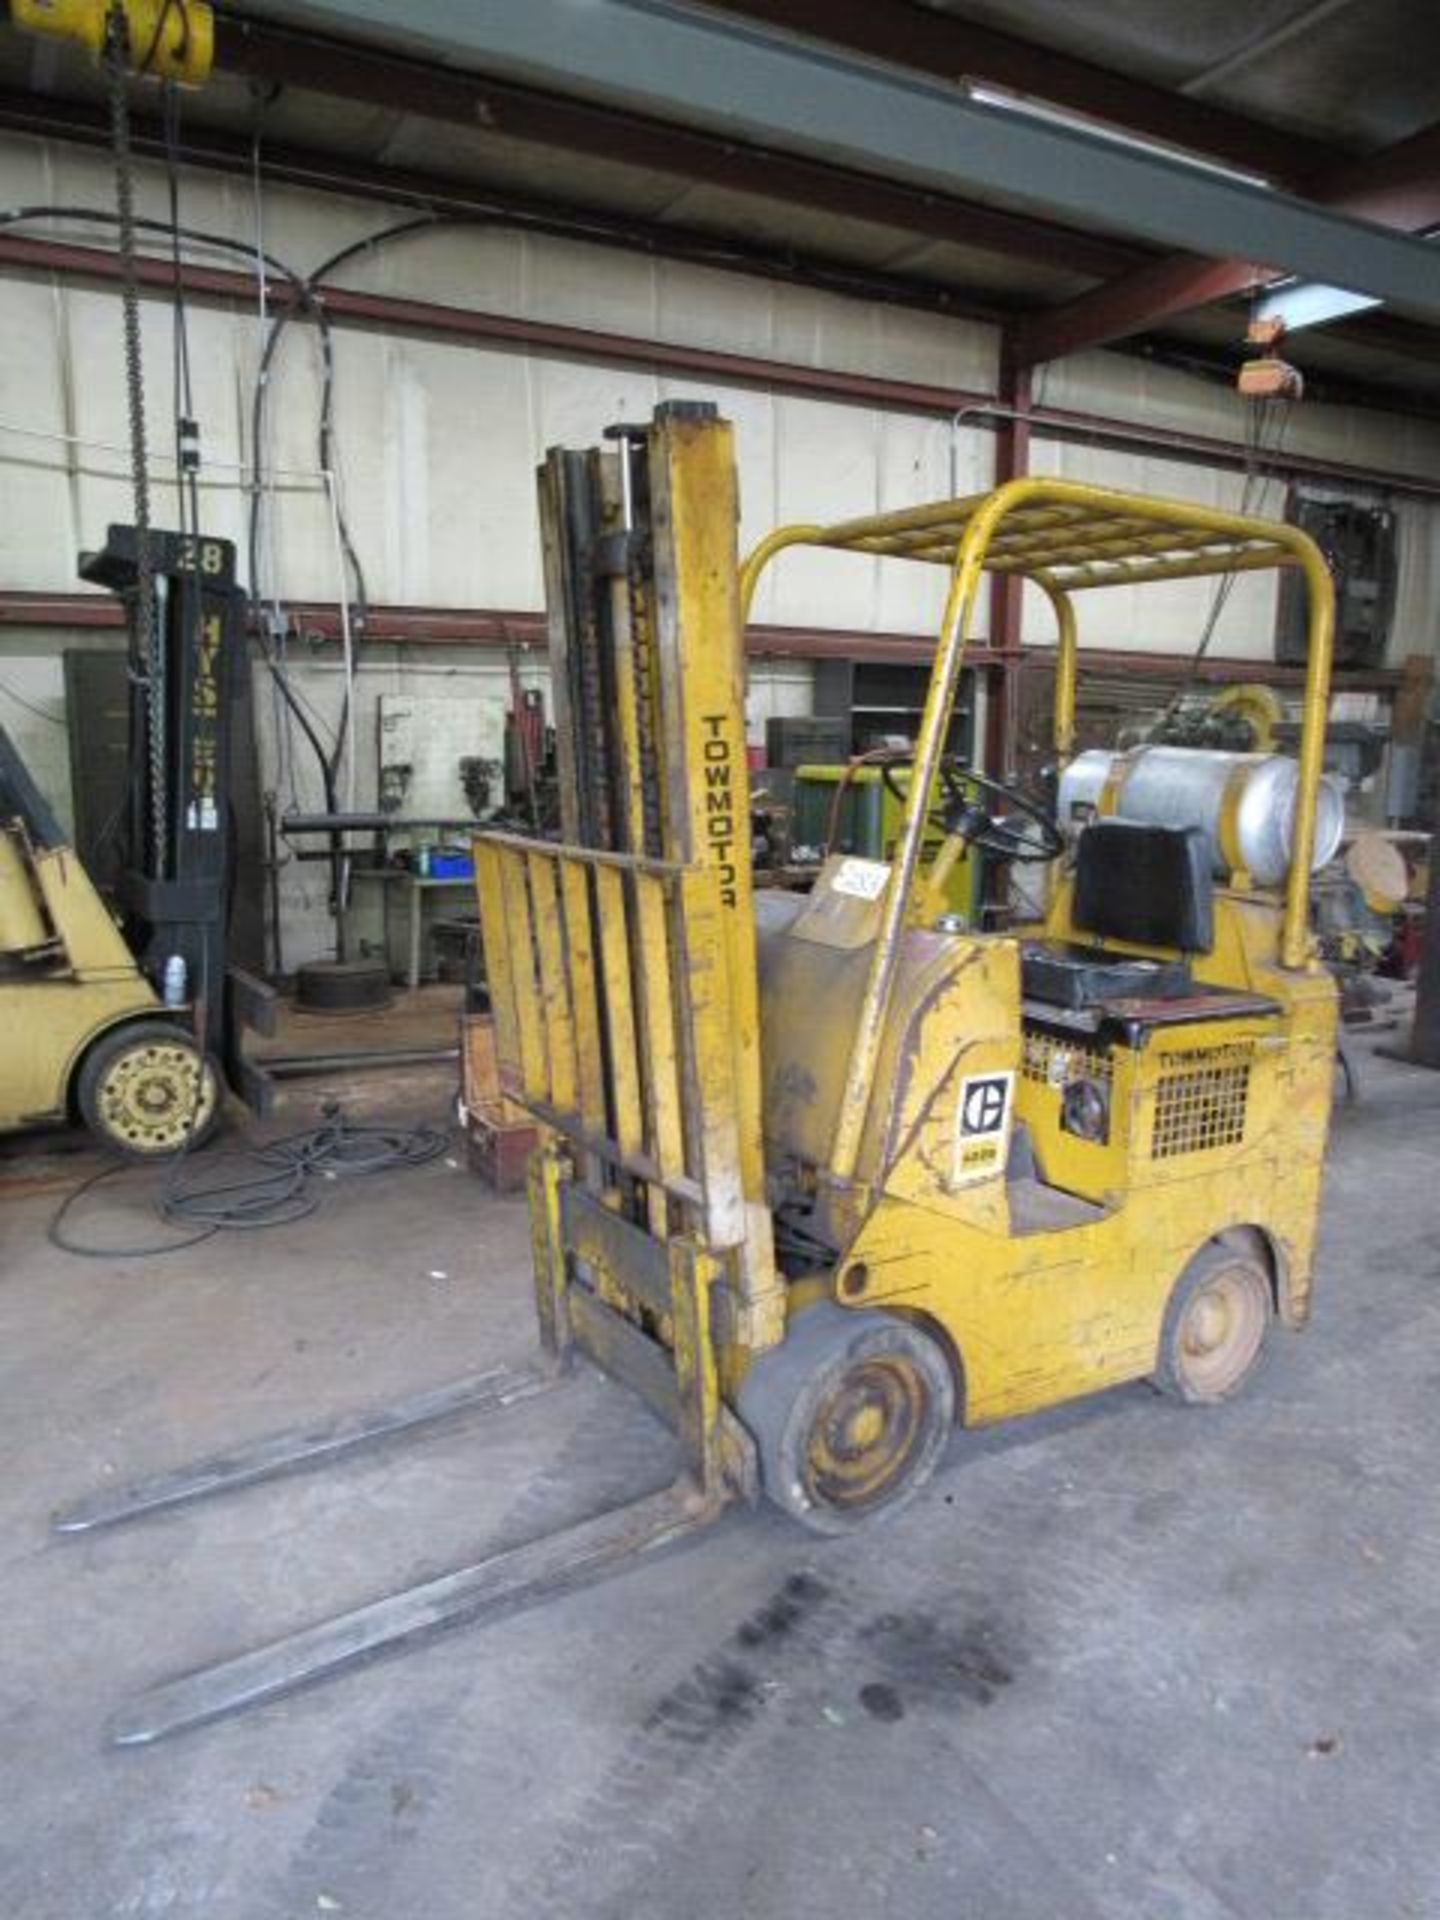 CAT 422S 2,500lb Capacity Tow Motor Propane Forklift with 2-Stage Mast, (4) Treaded Cushion Tires,